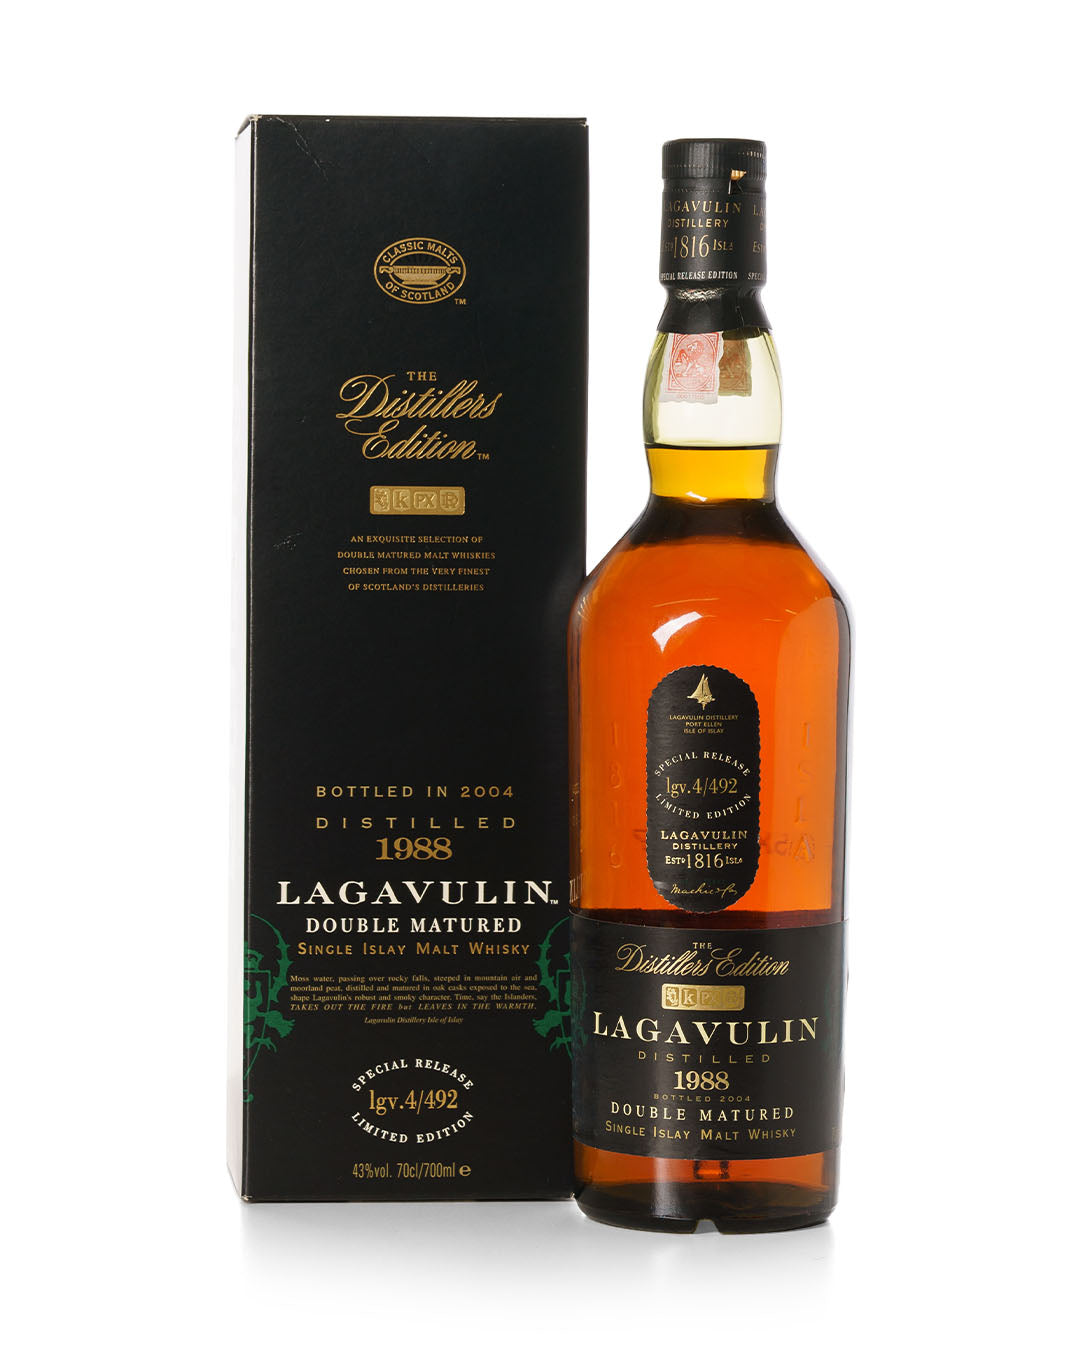 Lagavulin 1988 16 Year Old Distillers Edition Bottled 2004 With Original Box